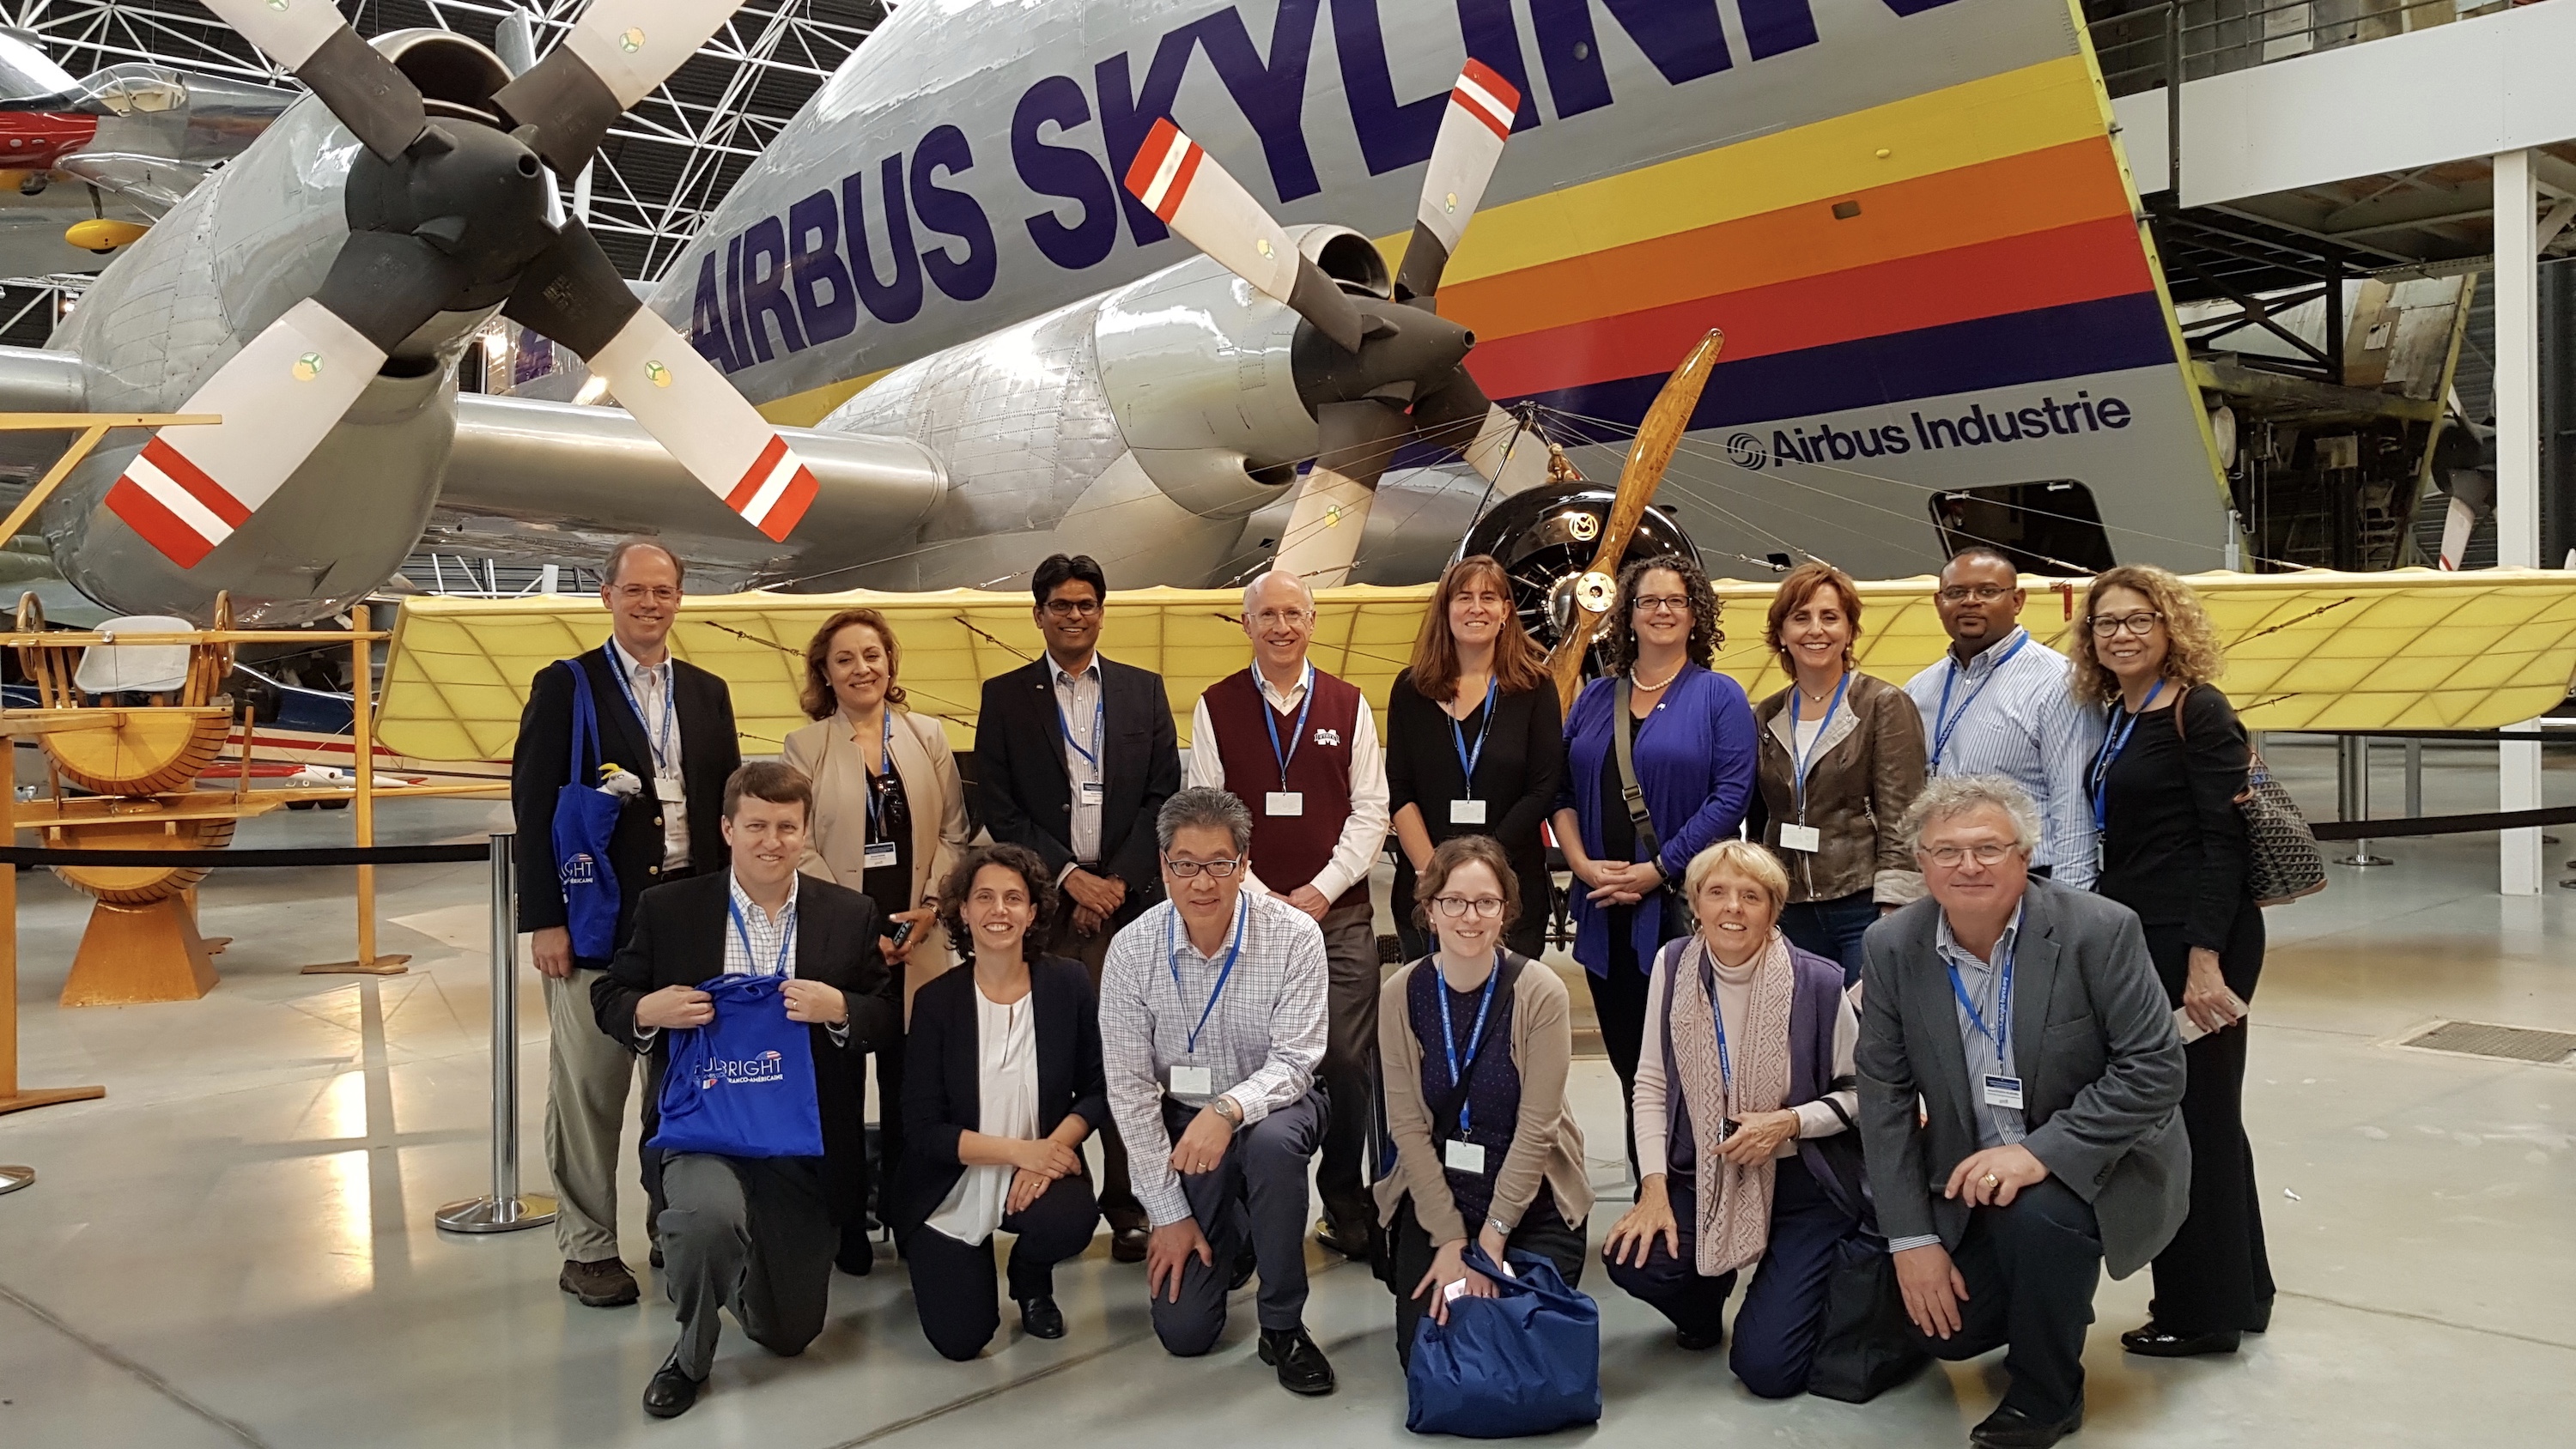 The Fulbright International Education Administrators (IEA) Seminar to France group (Director of Services for International Students and Scholars (SISS) Wesley Young third from left, kneeling) at the Airbus factory in Toulouse.